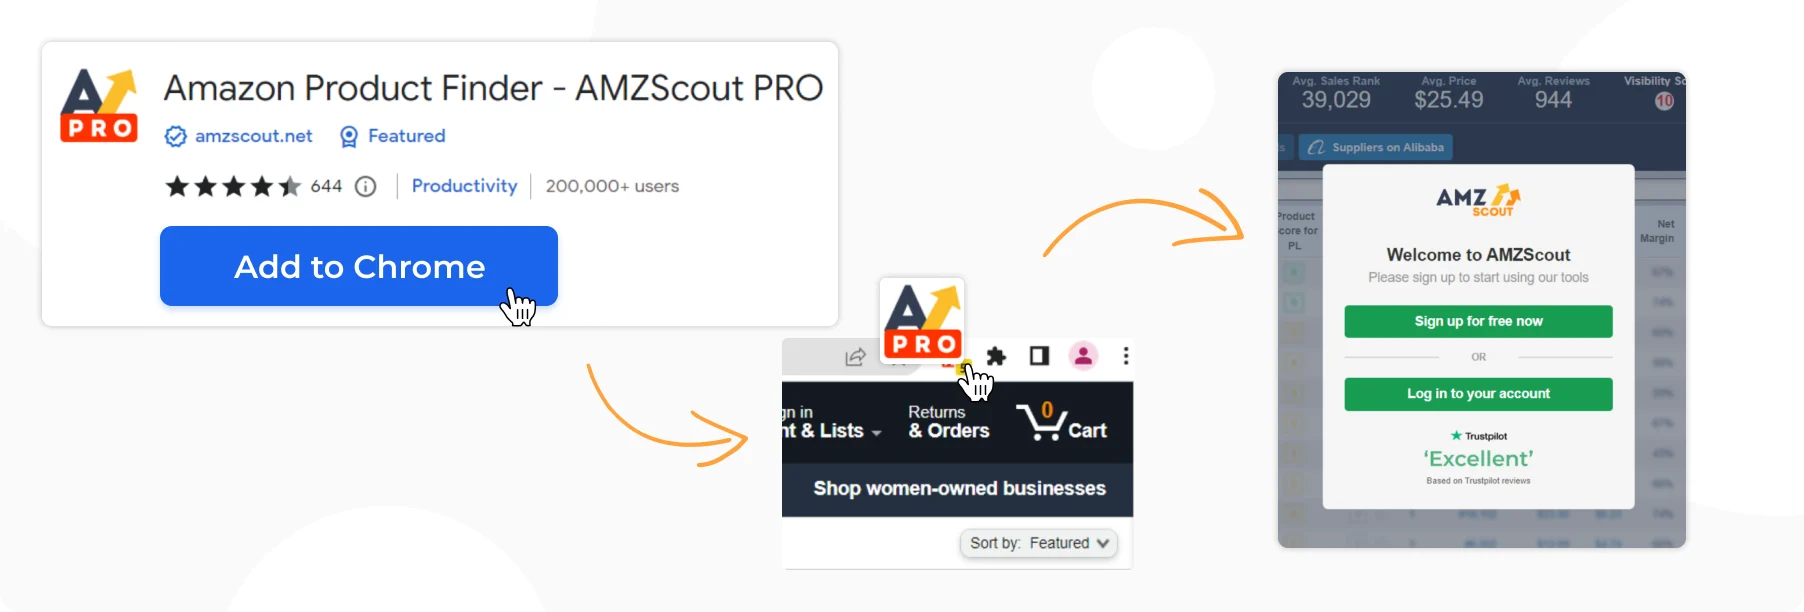 amzscout pro - amazon product finder